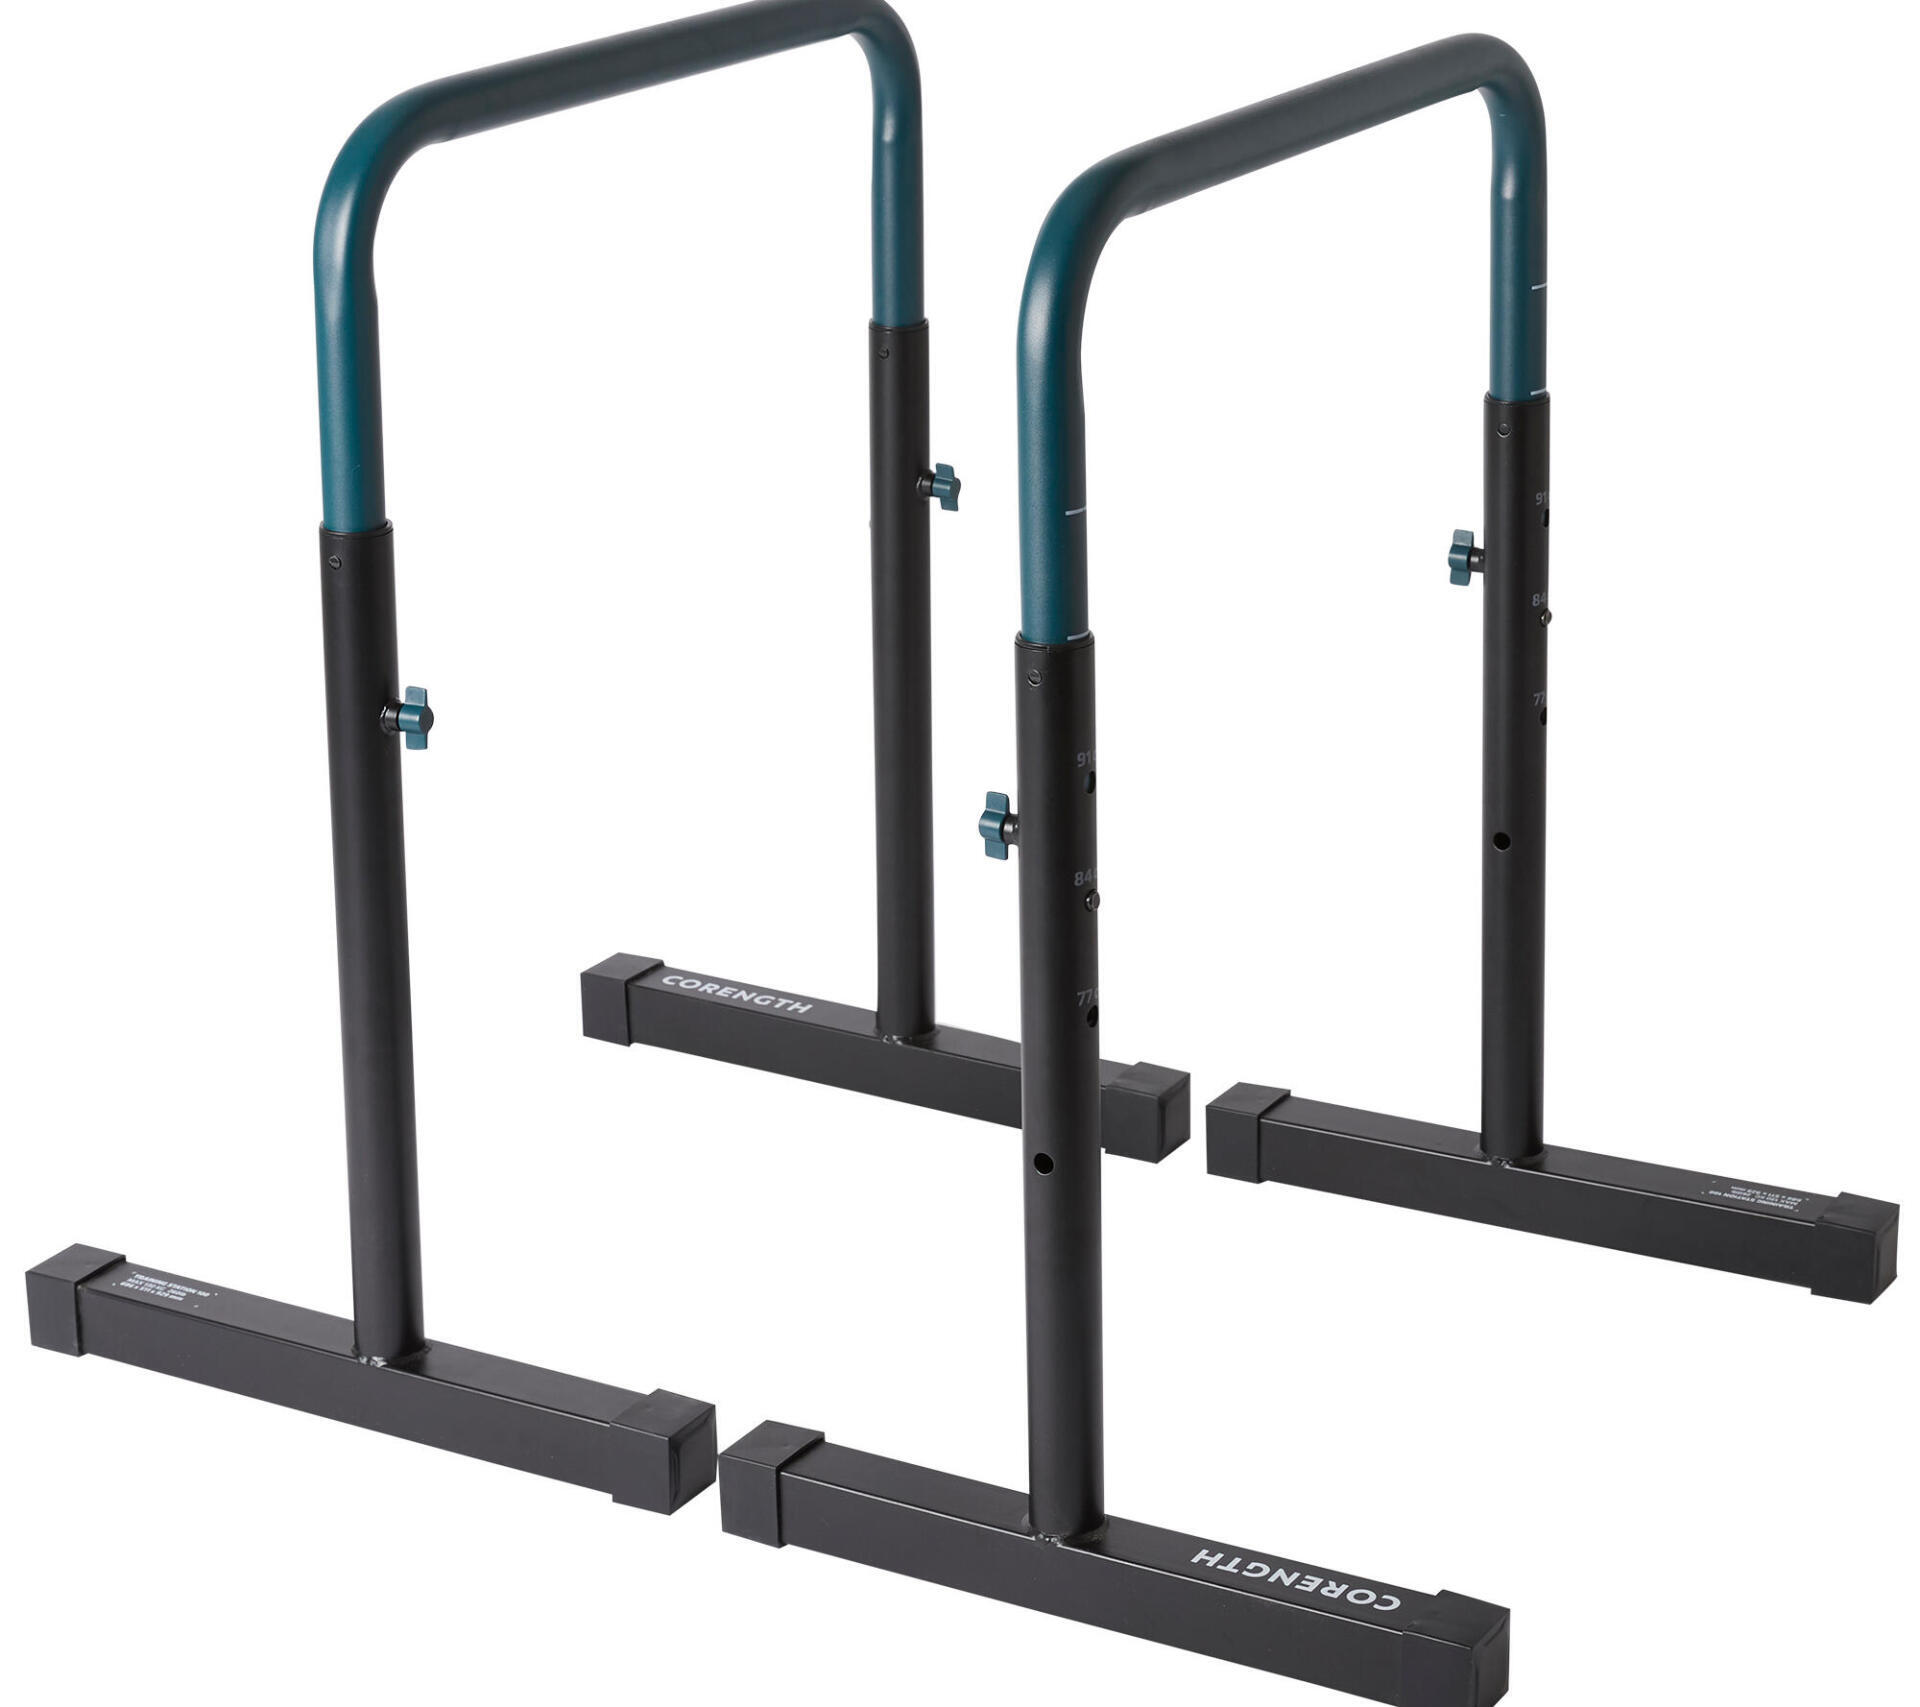 Compact dip / parallel bar station to help you build upper-body strength at home.